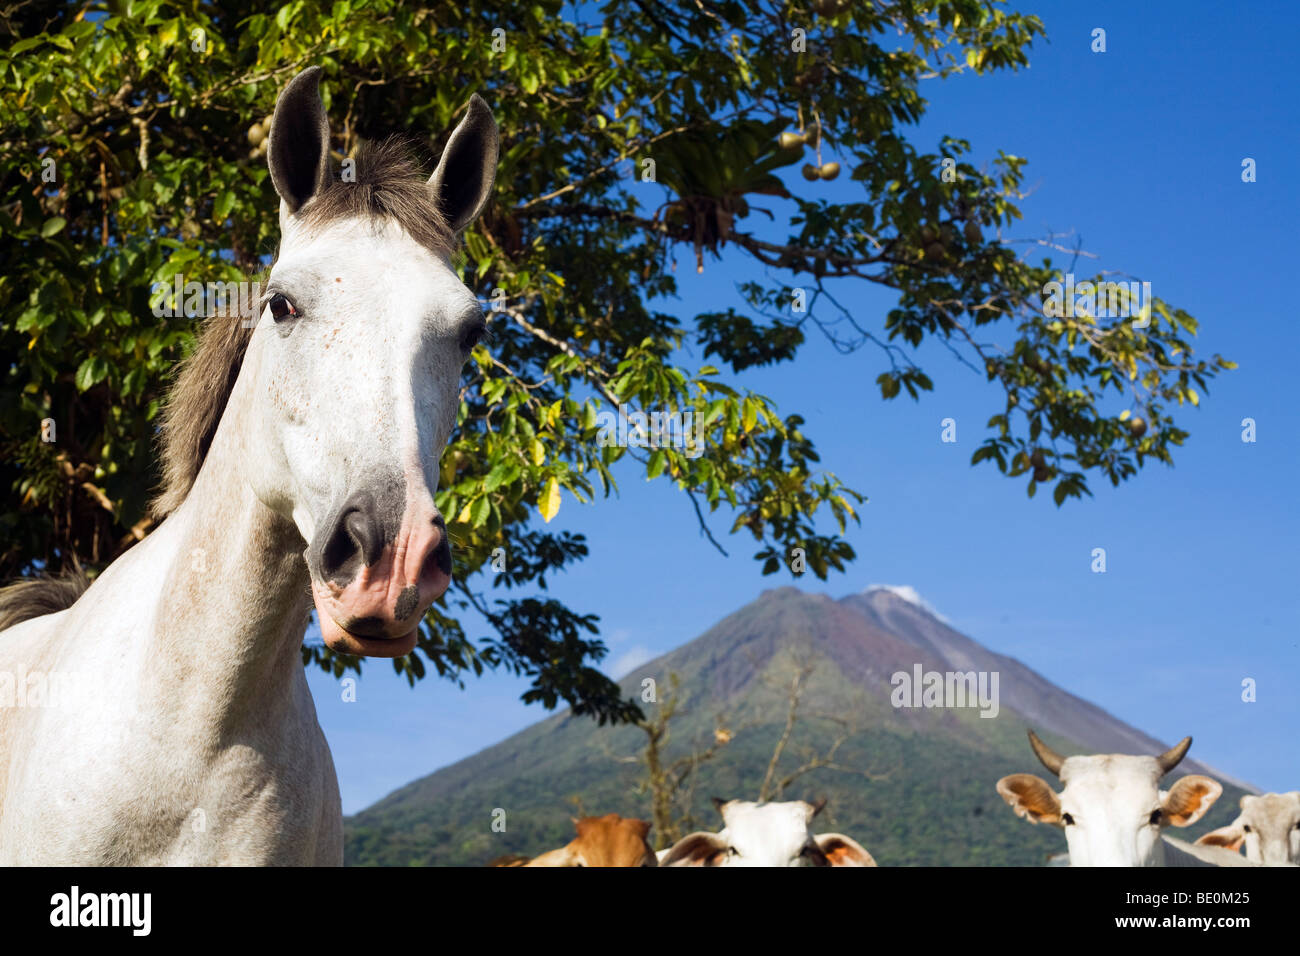 A herd of farm animals with Arenal Volcano in the background Stock Photo